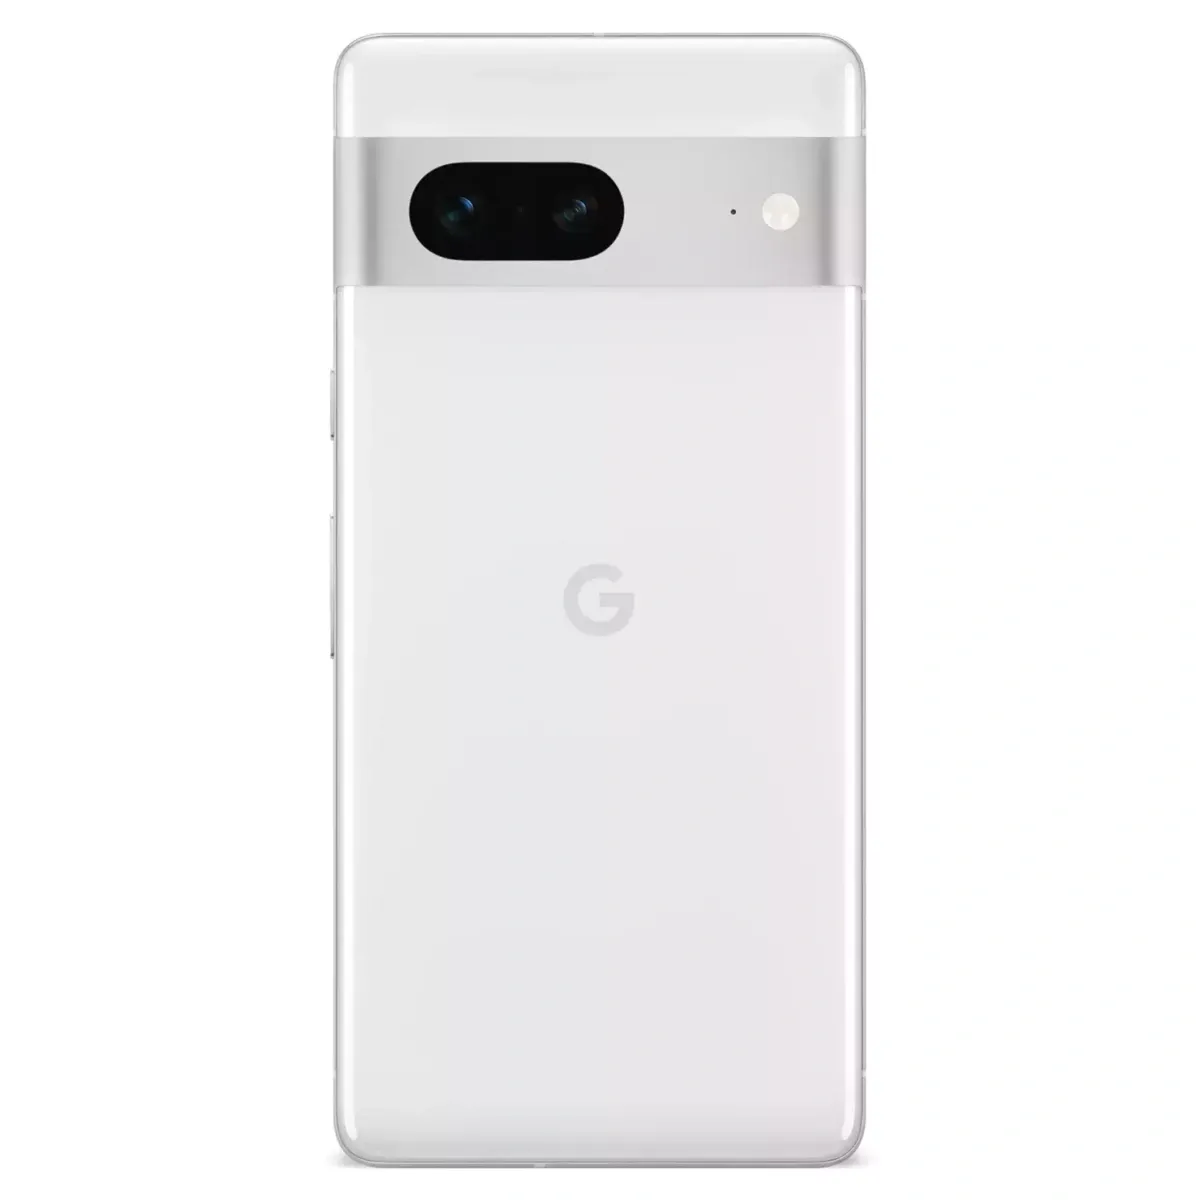 The Google Pixel 7 is a refinement of the already excellent Pixel 6, making for a very refined flagship phone without the exorbitant prices.